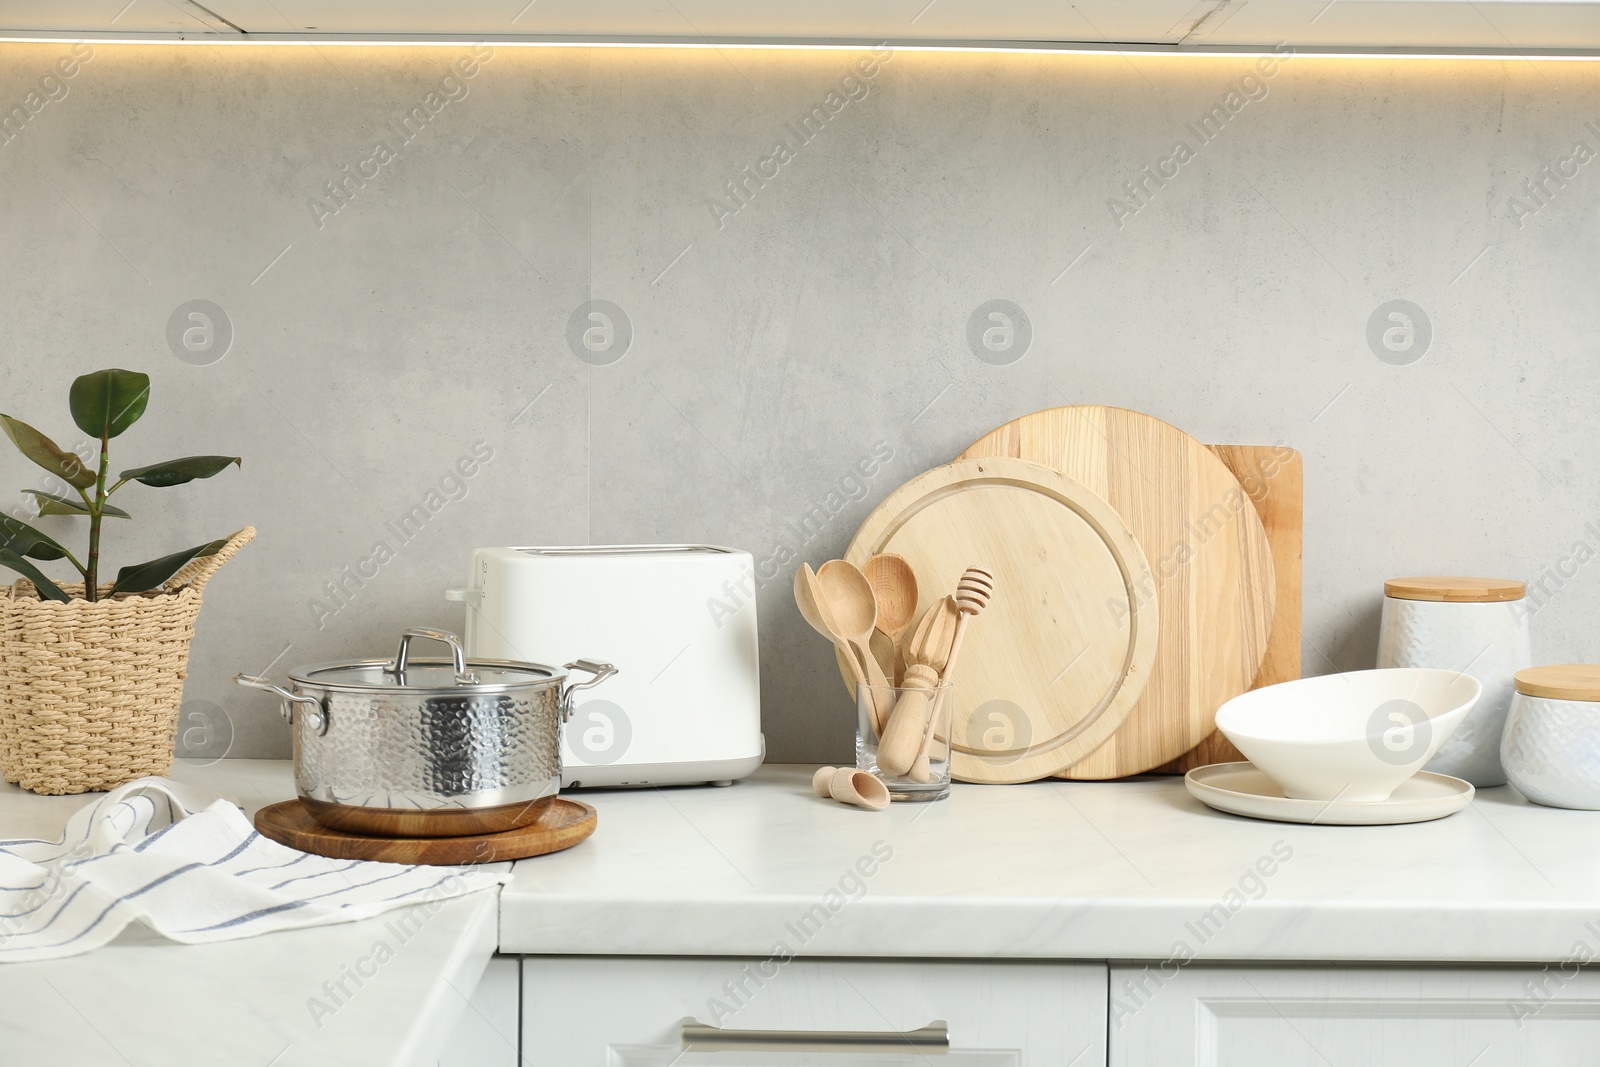 Photo of Different wooden cutting boards, toaster and other cooking utensils on white countertop in kitchen